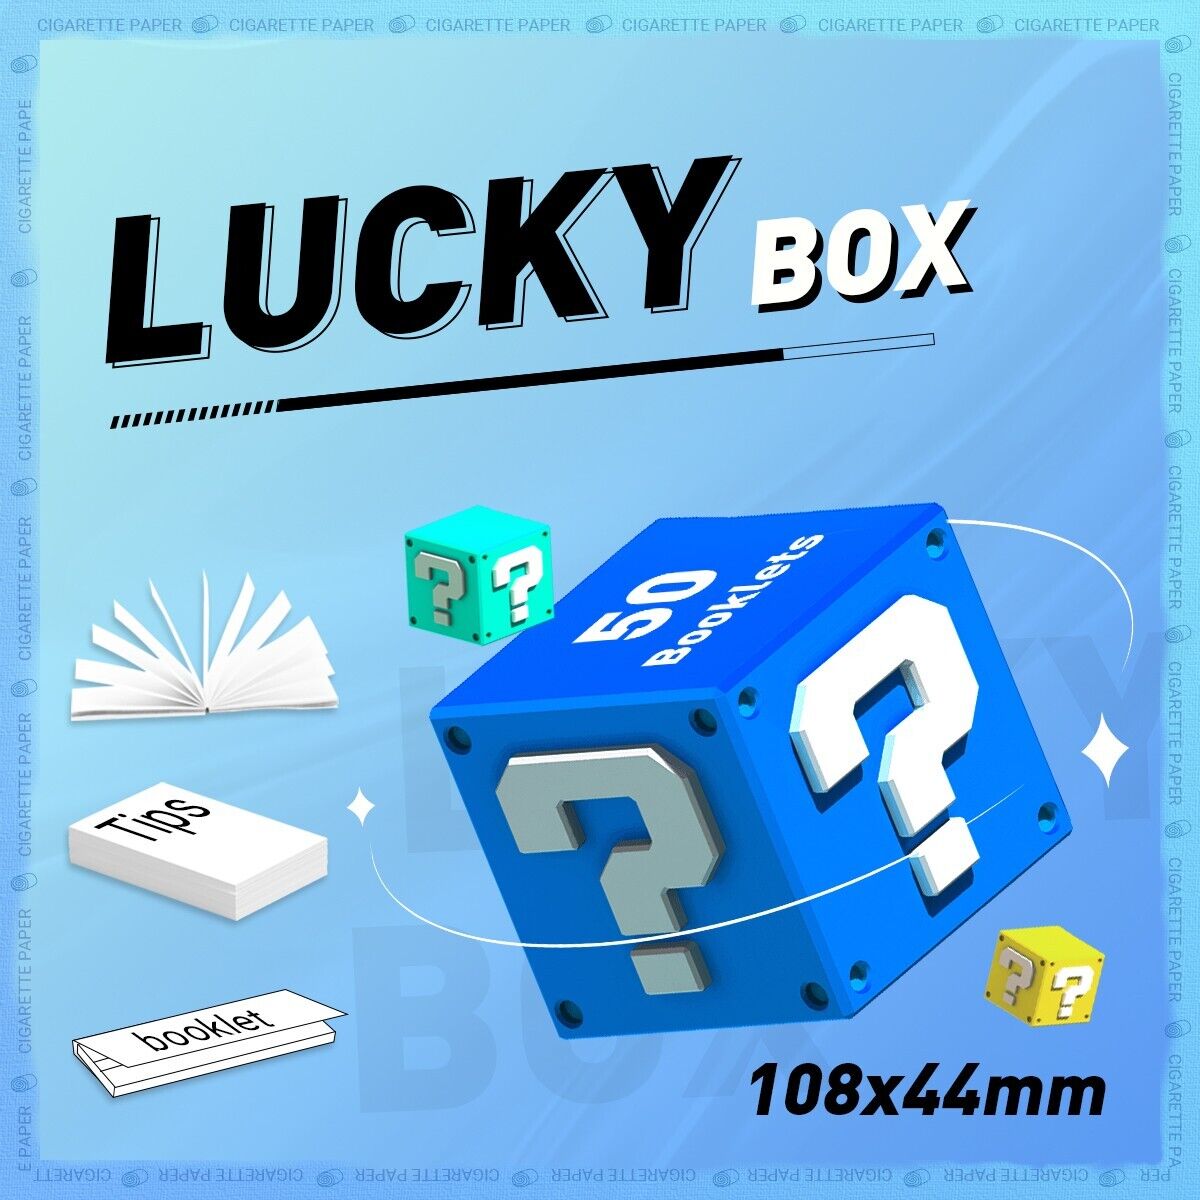 Lucky Box 50 Booklet King Size Slim 108*44mm Rolling Papers Smoking Paper